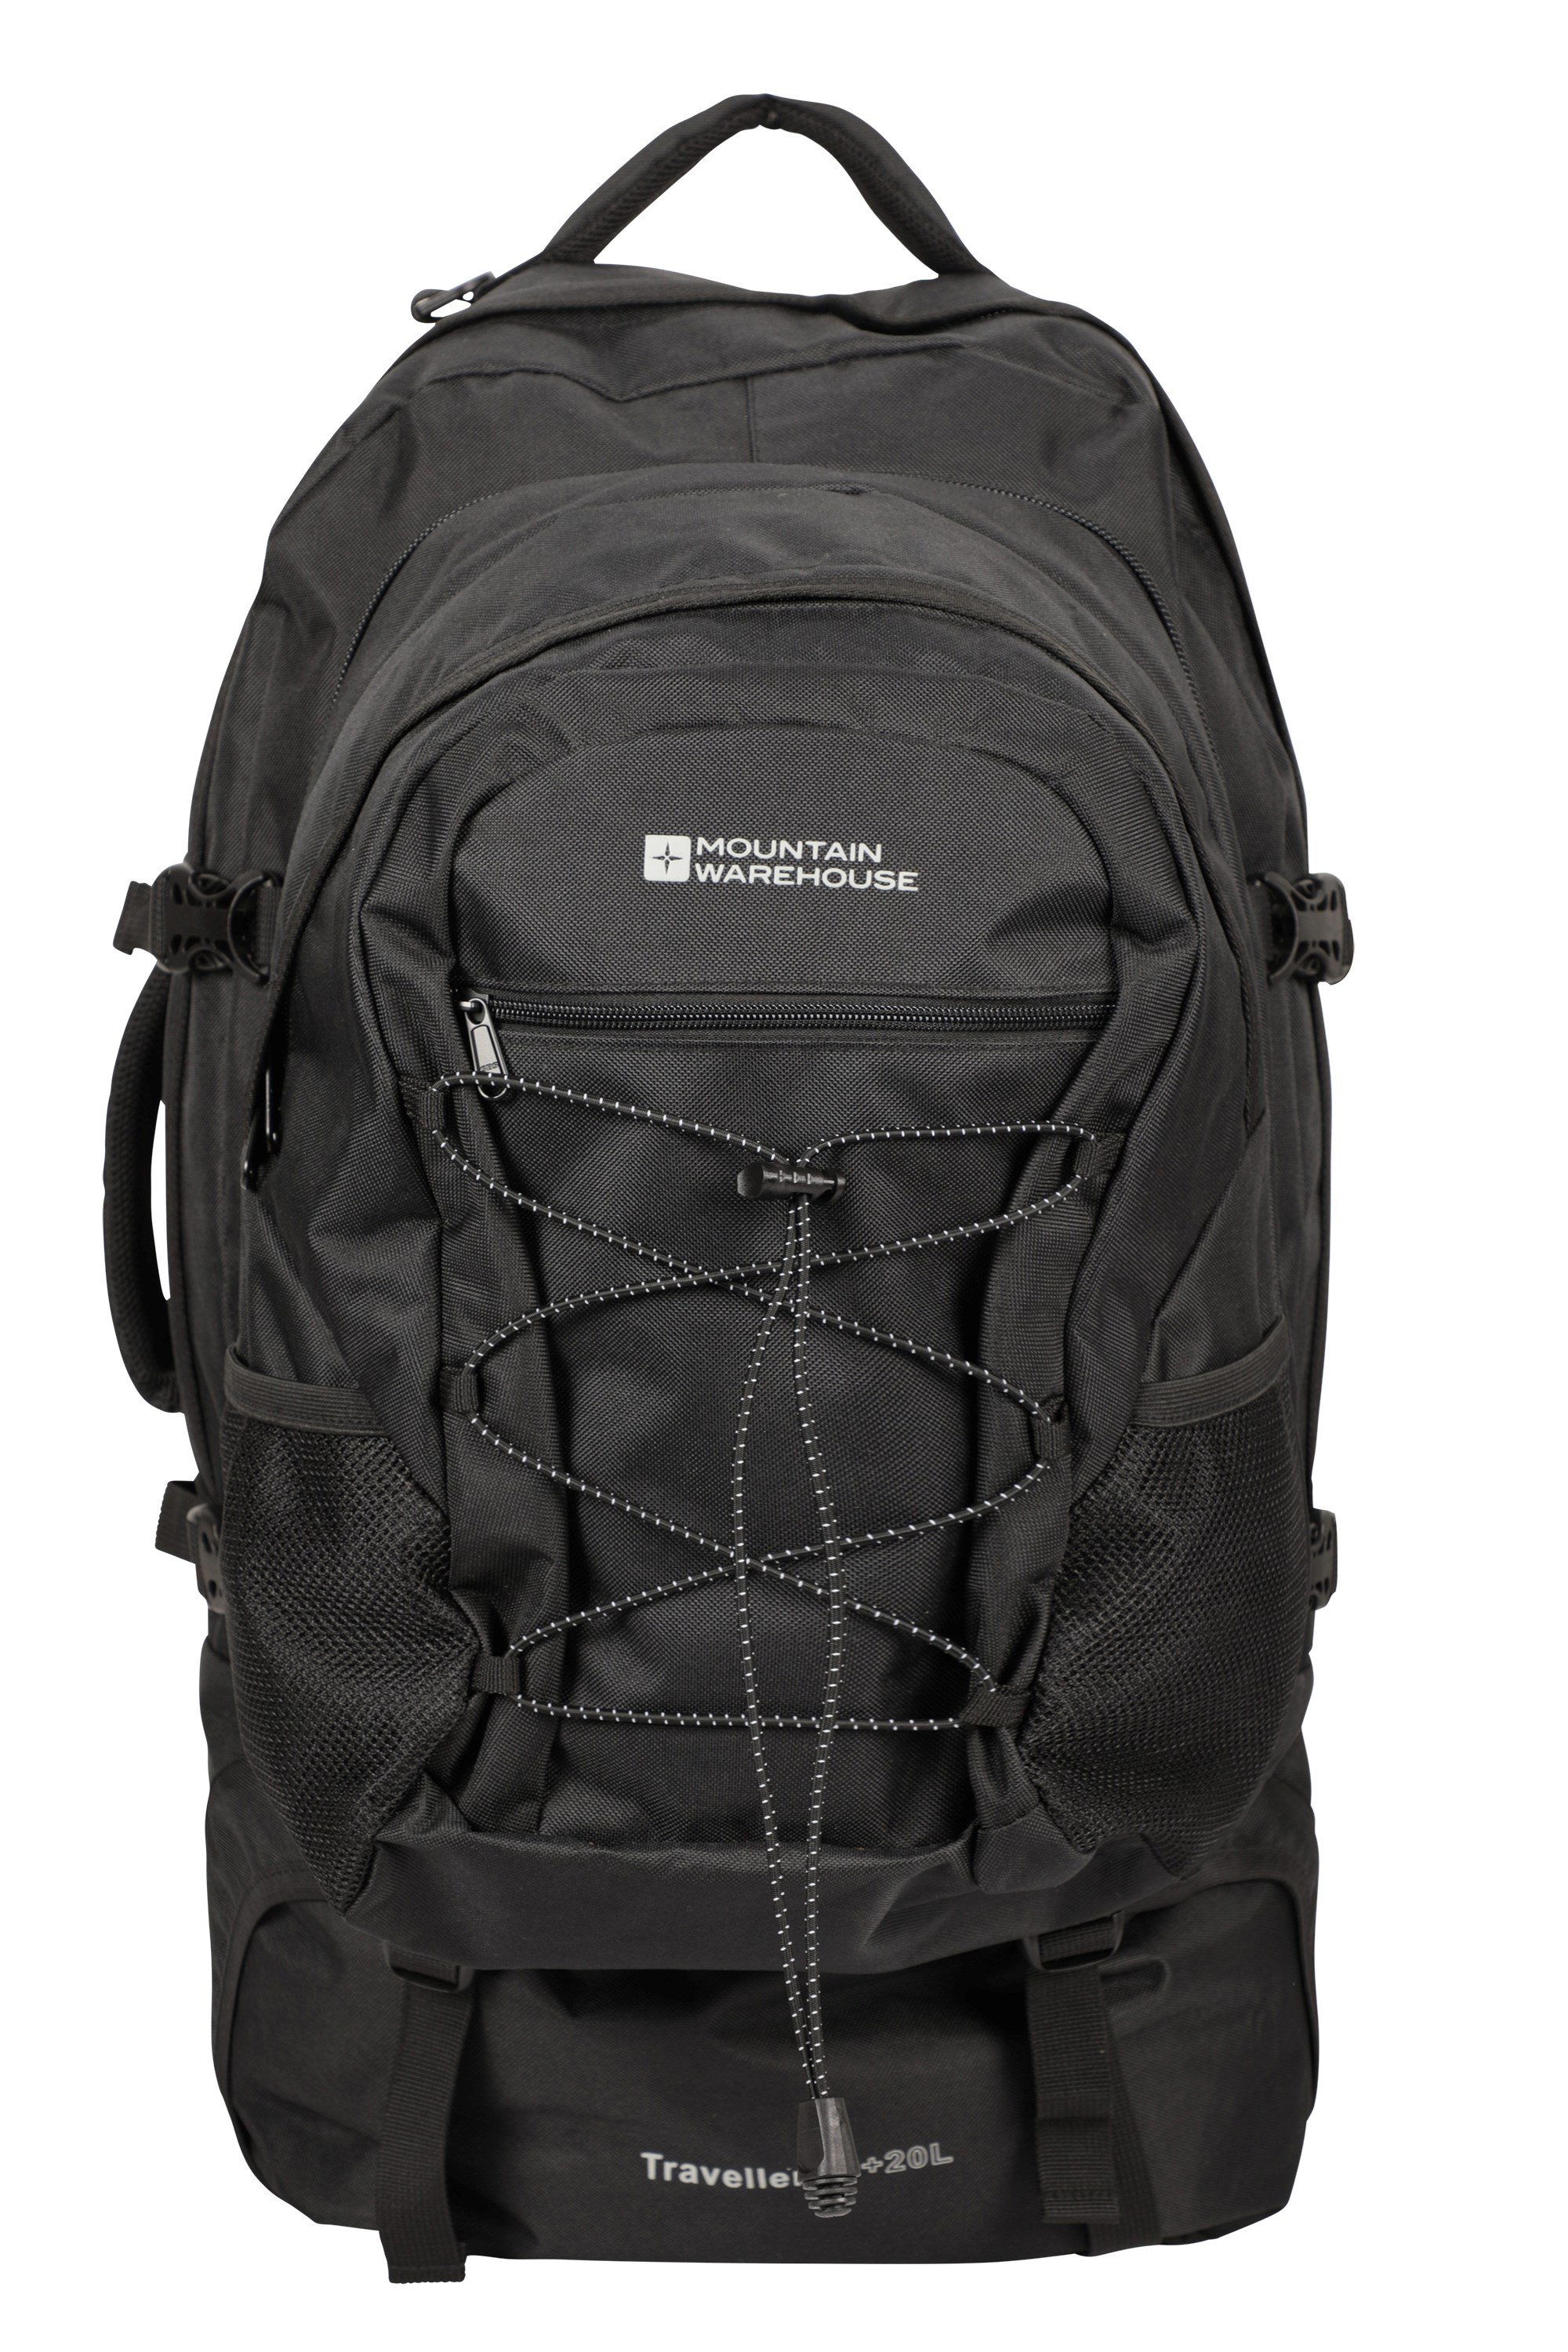 Mountain Warehouse Traveller 60L 20L Backpack - Black | Size One